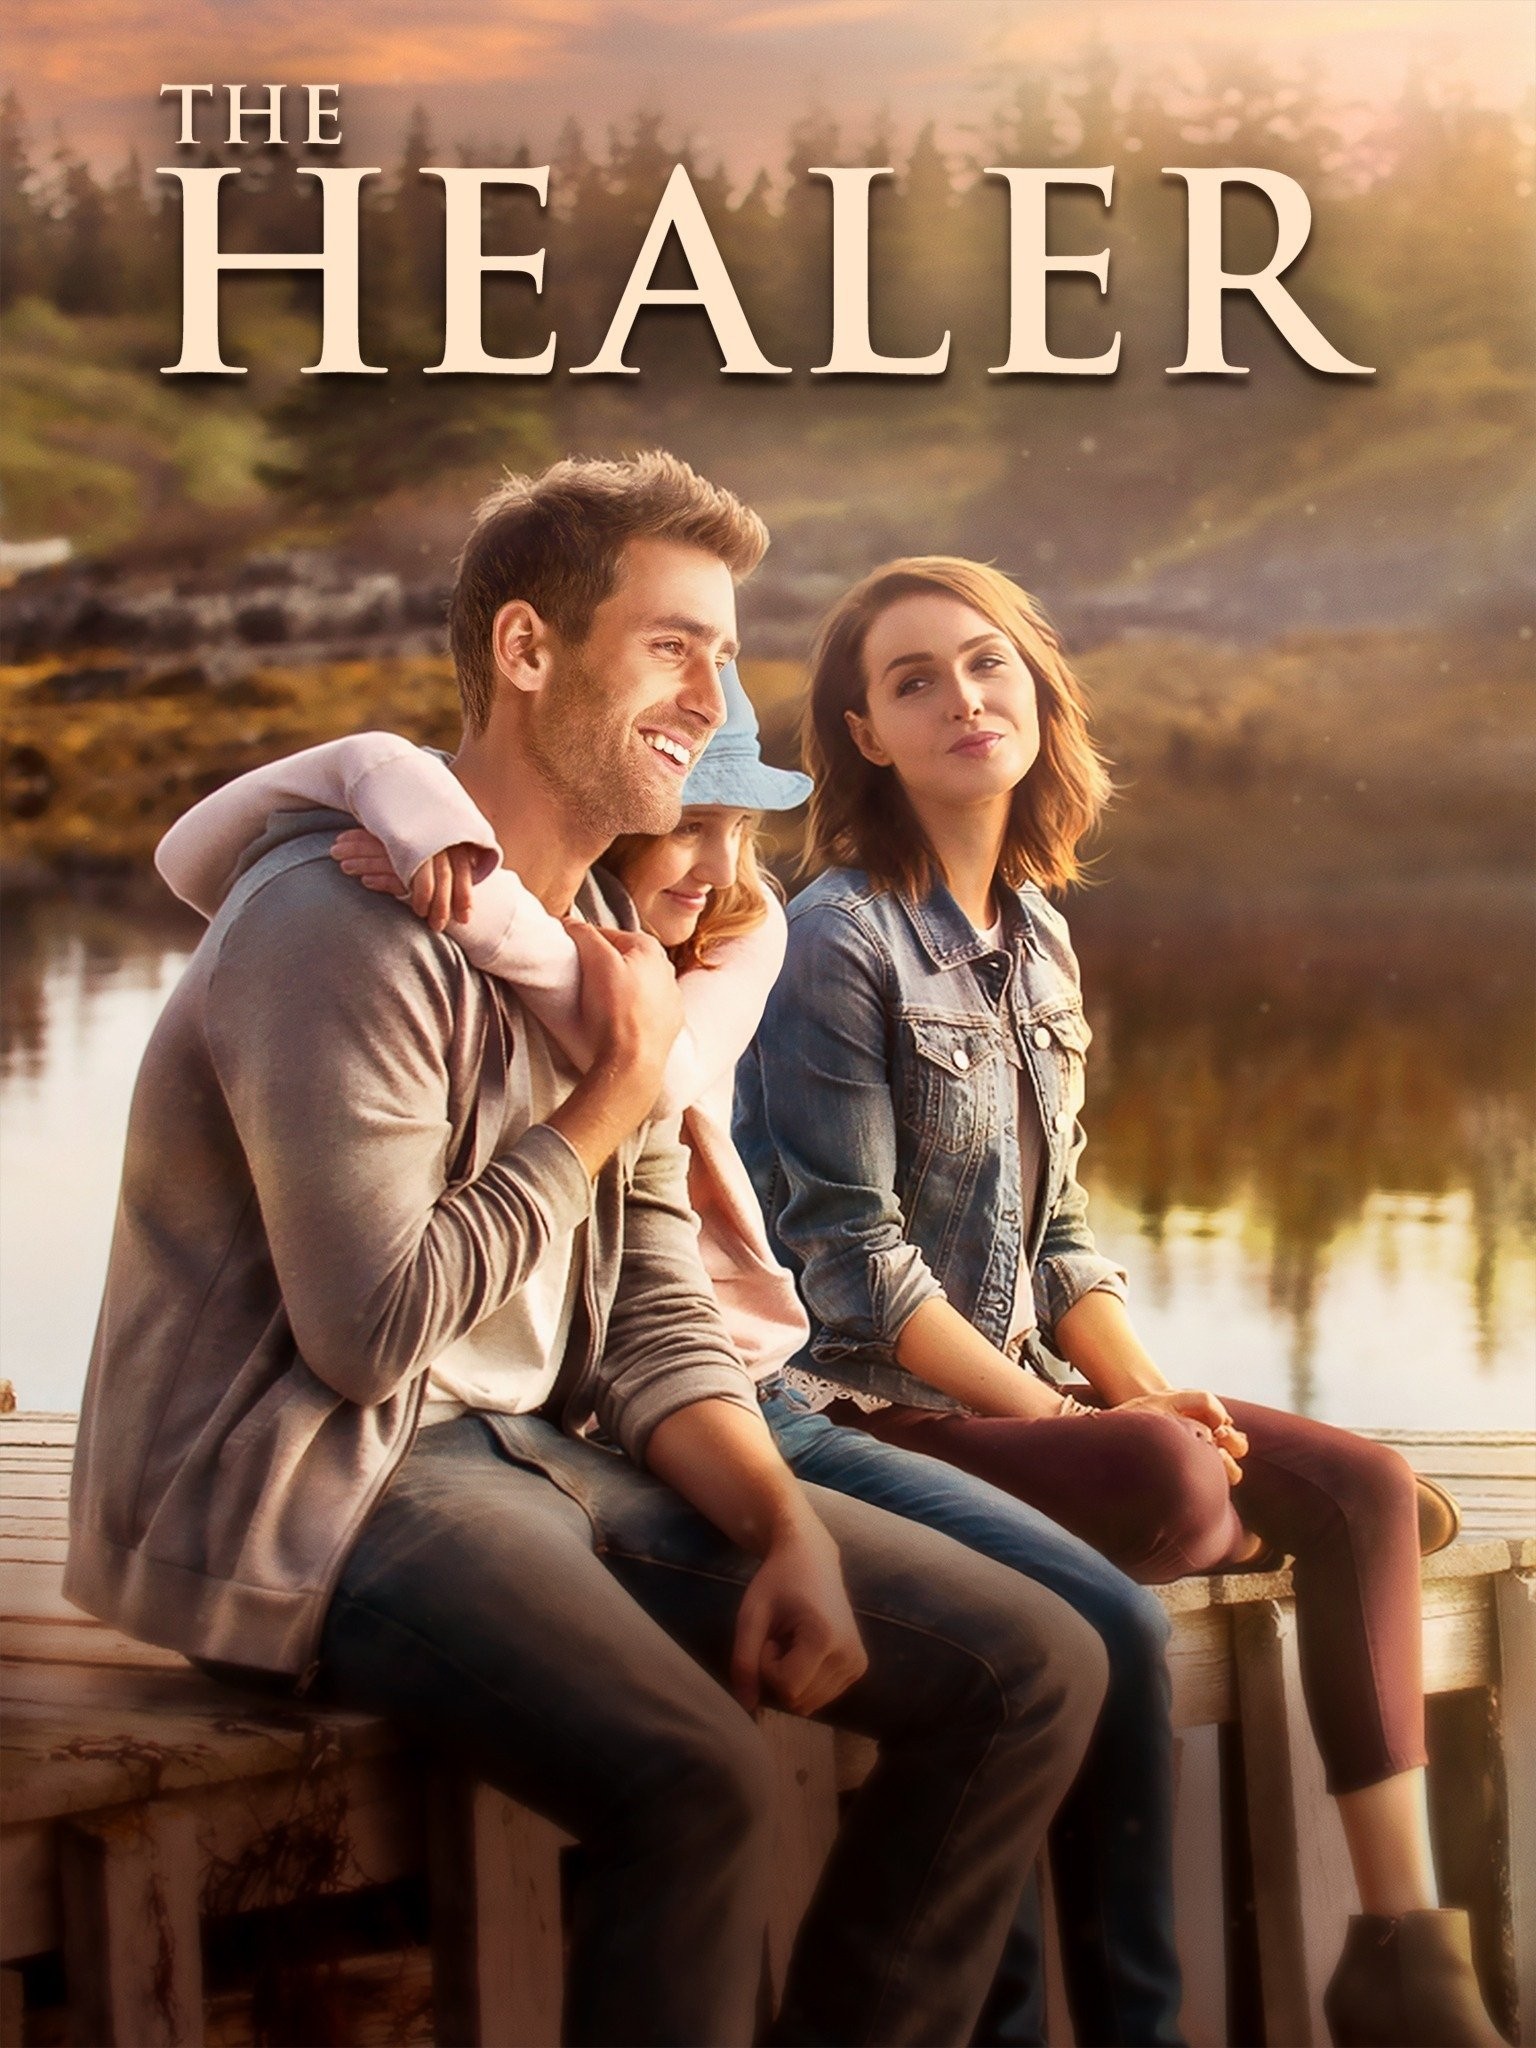 NEWS] Redo The Healer Season 2 is set to premiere sometime in the